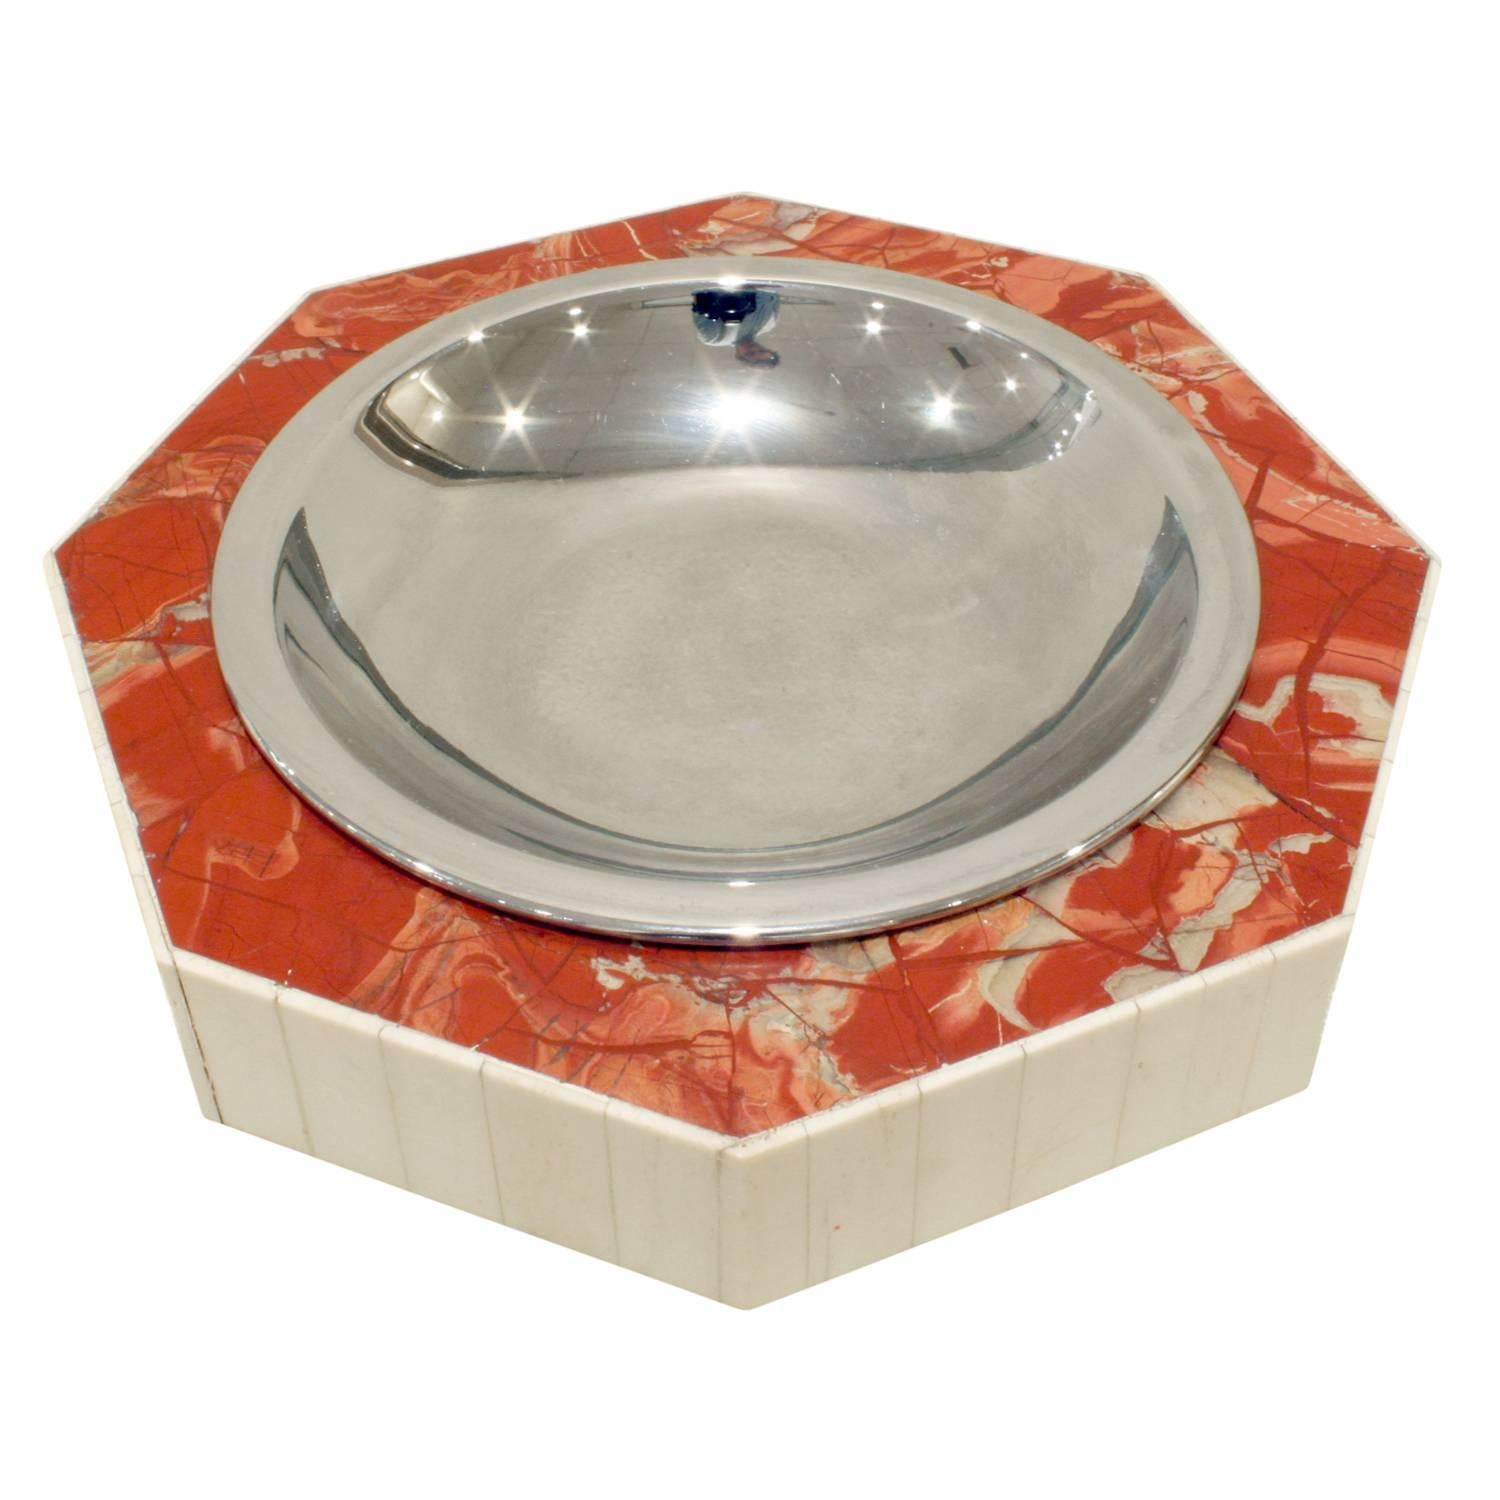 Decorative bowl in tessellated red marble with bone around the outside and chrome center along with felt bottom by Jonson & Marcius, American, 1970s (label on bottom 